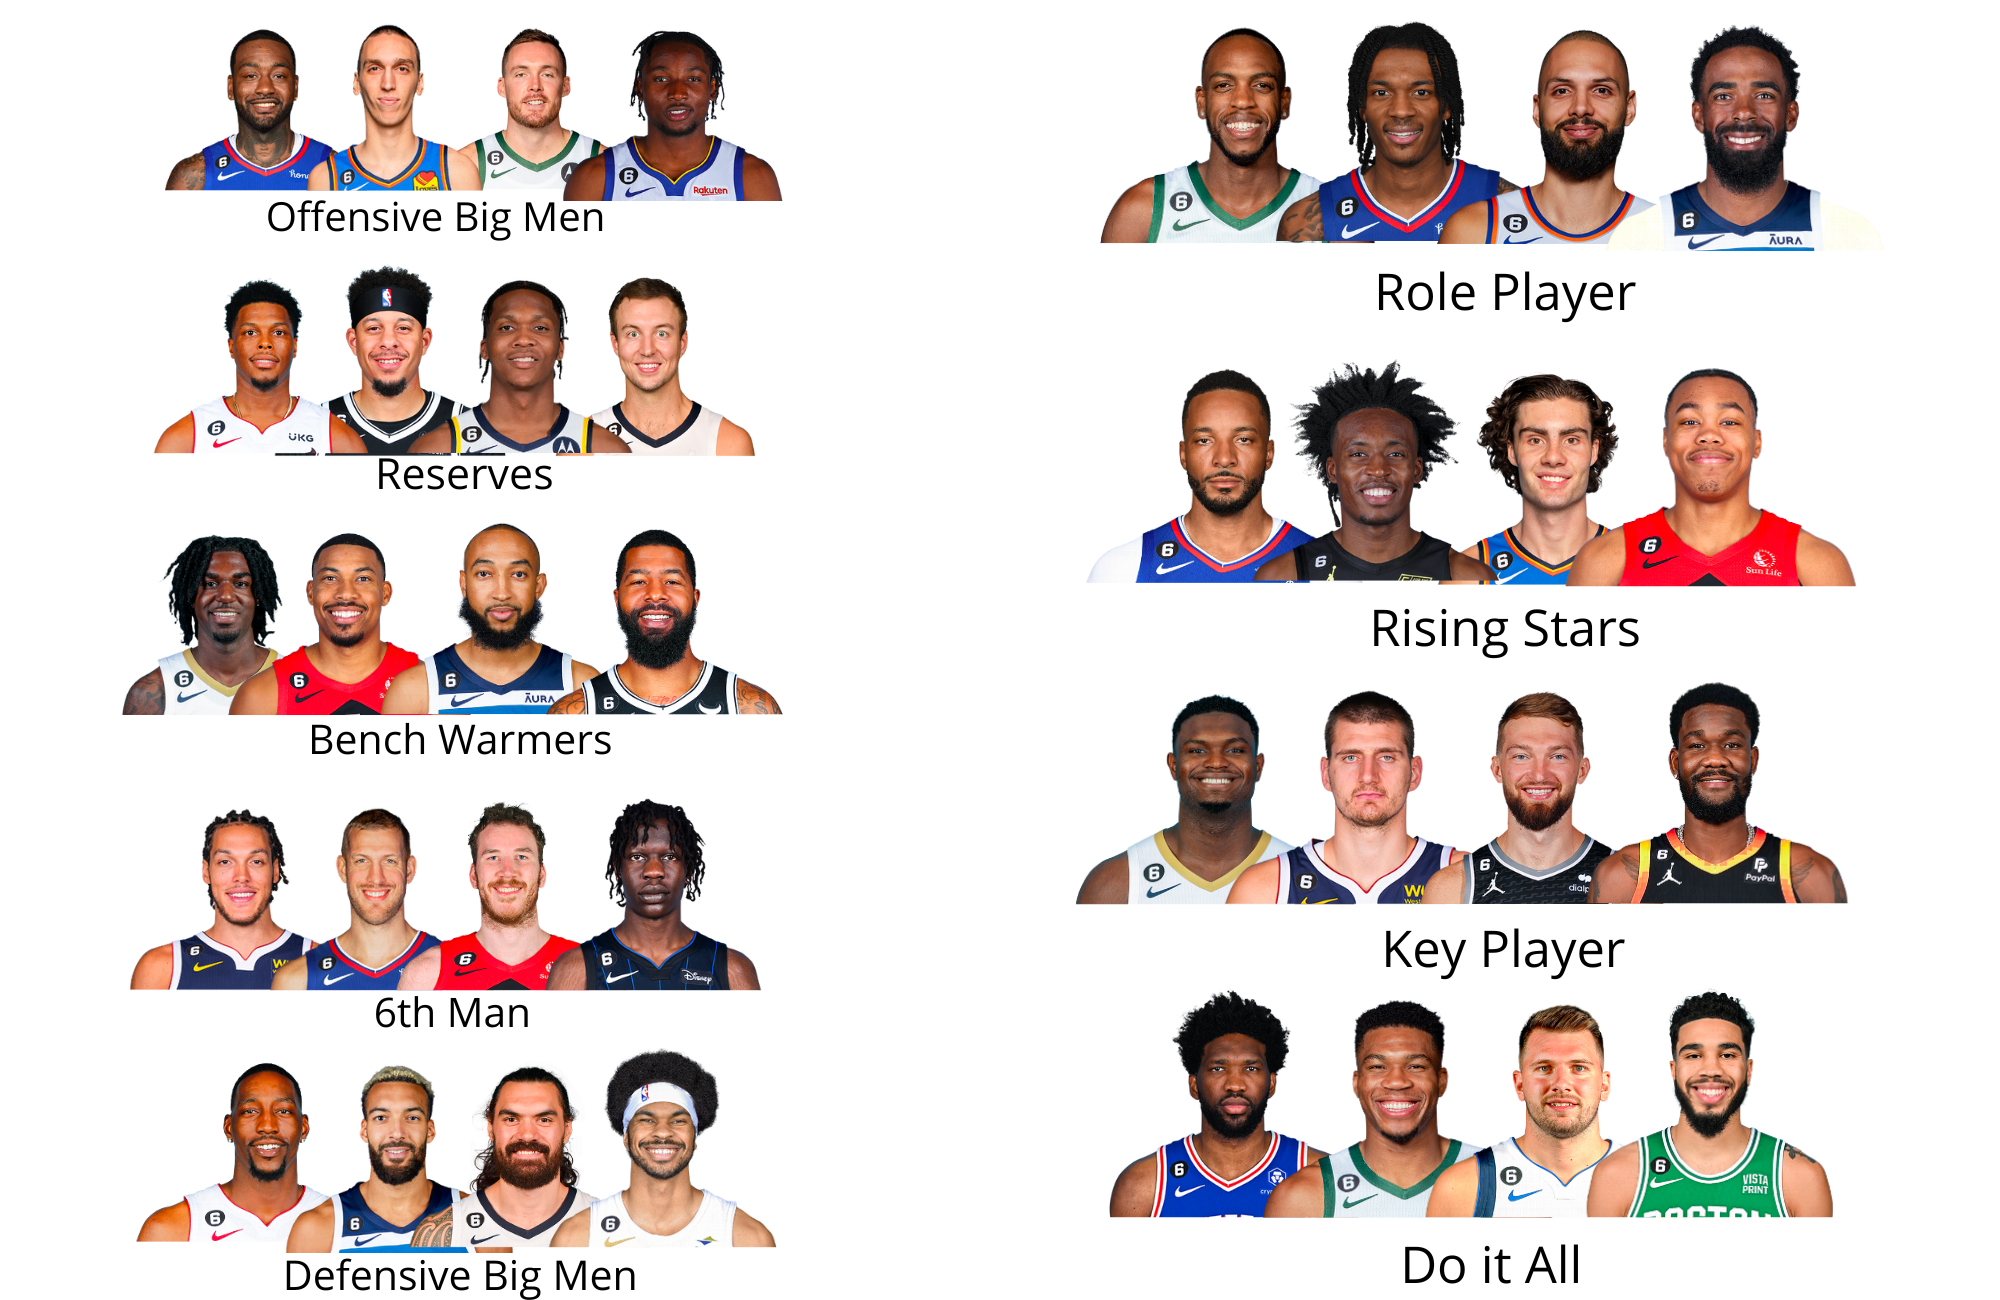 Machine Learning Uncovers Nine Distinct Player Types in the NBA